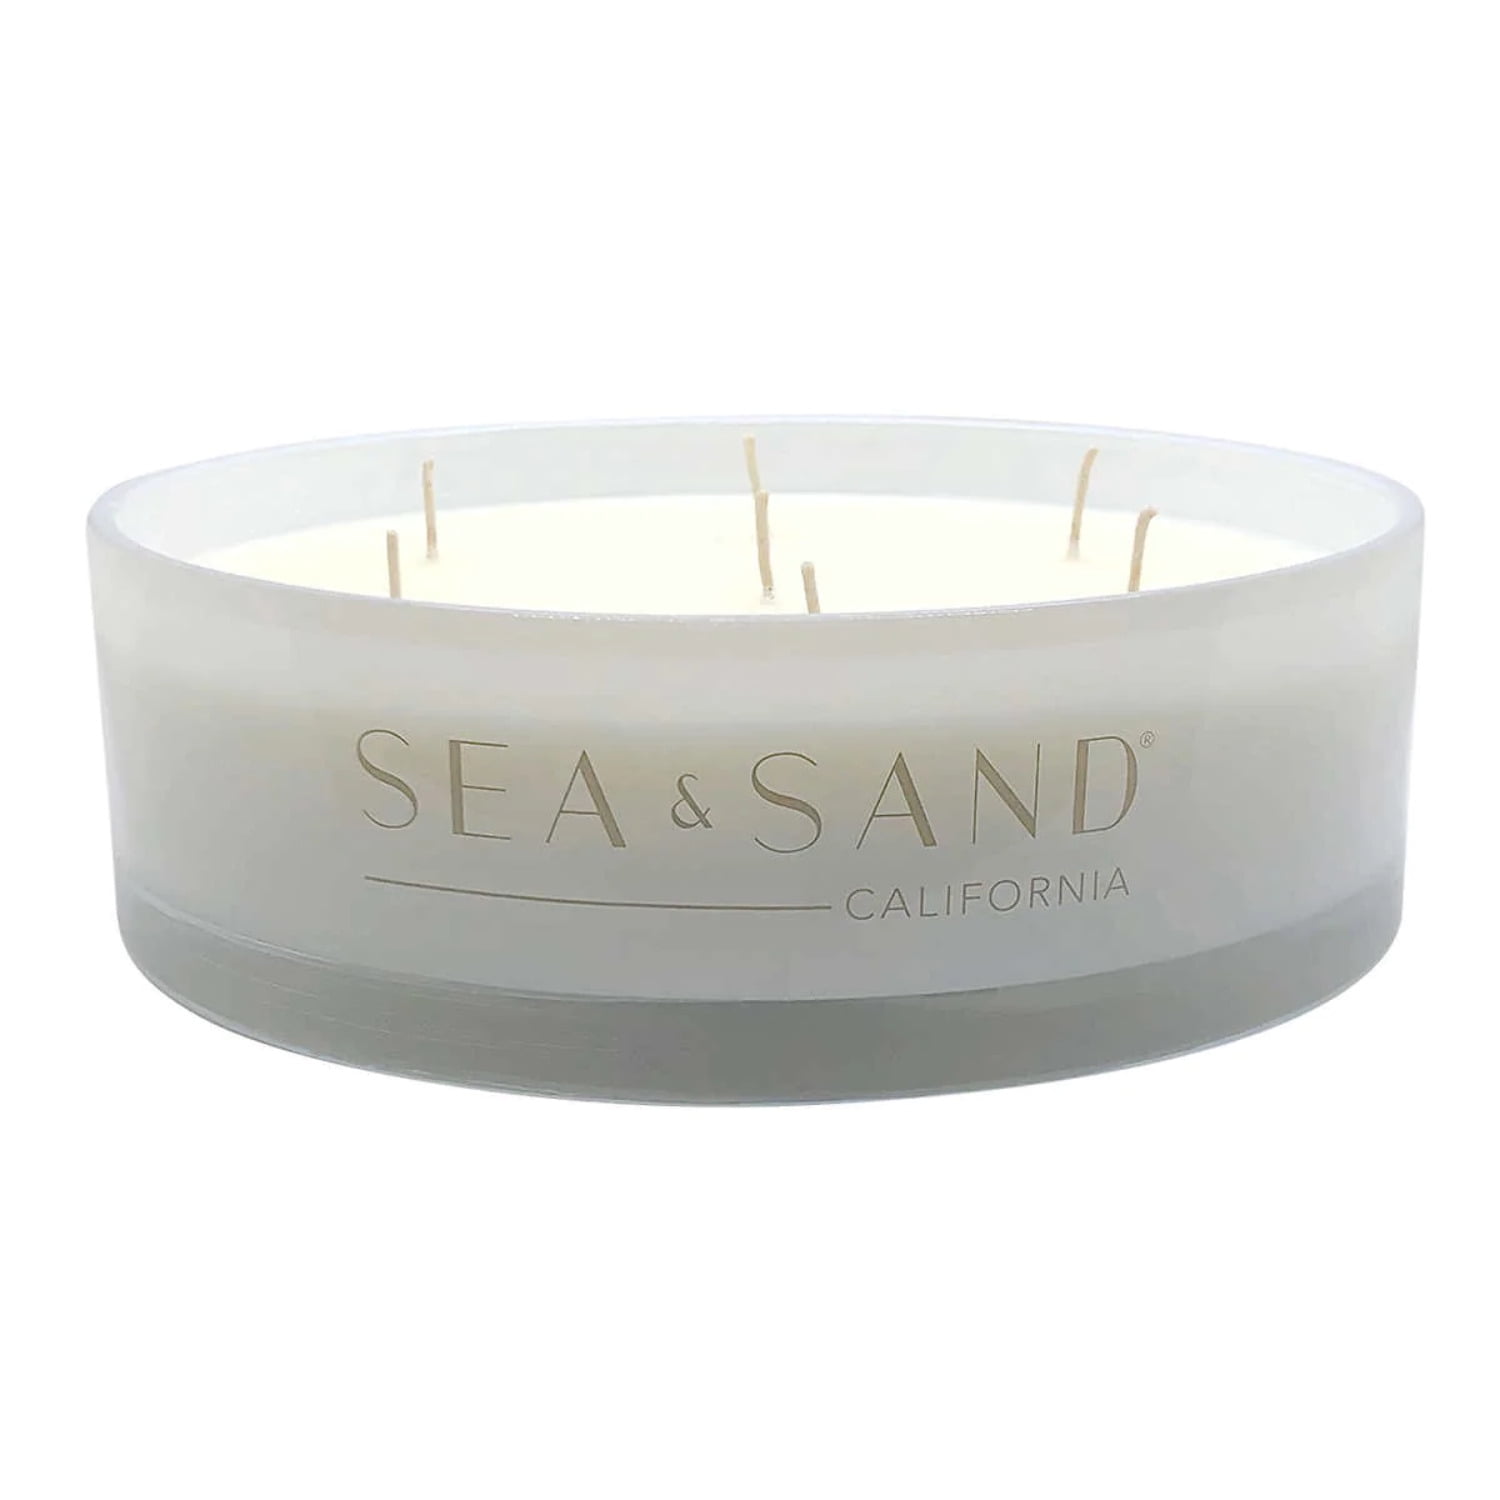 Sea & Sand California Essential Oil Candle Set 3pk Soy Wax Blend